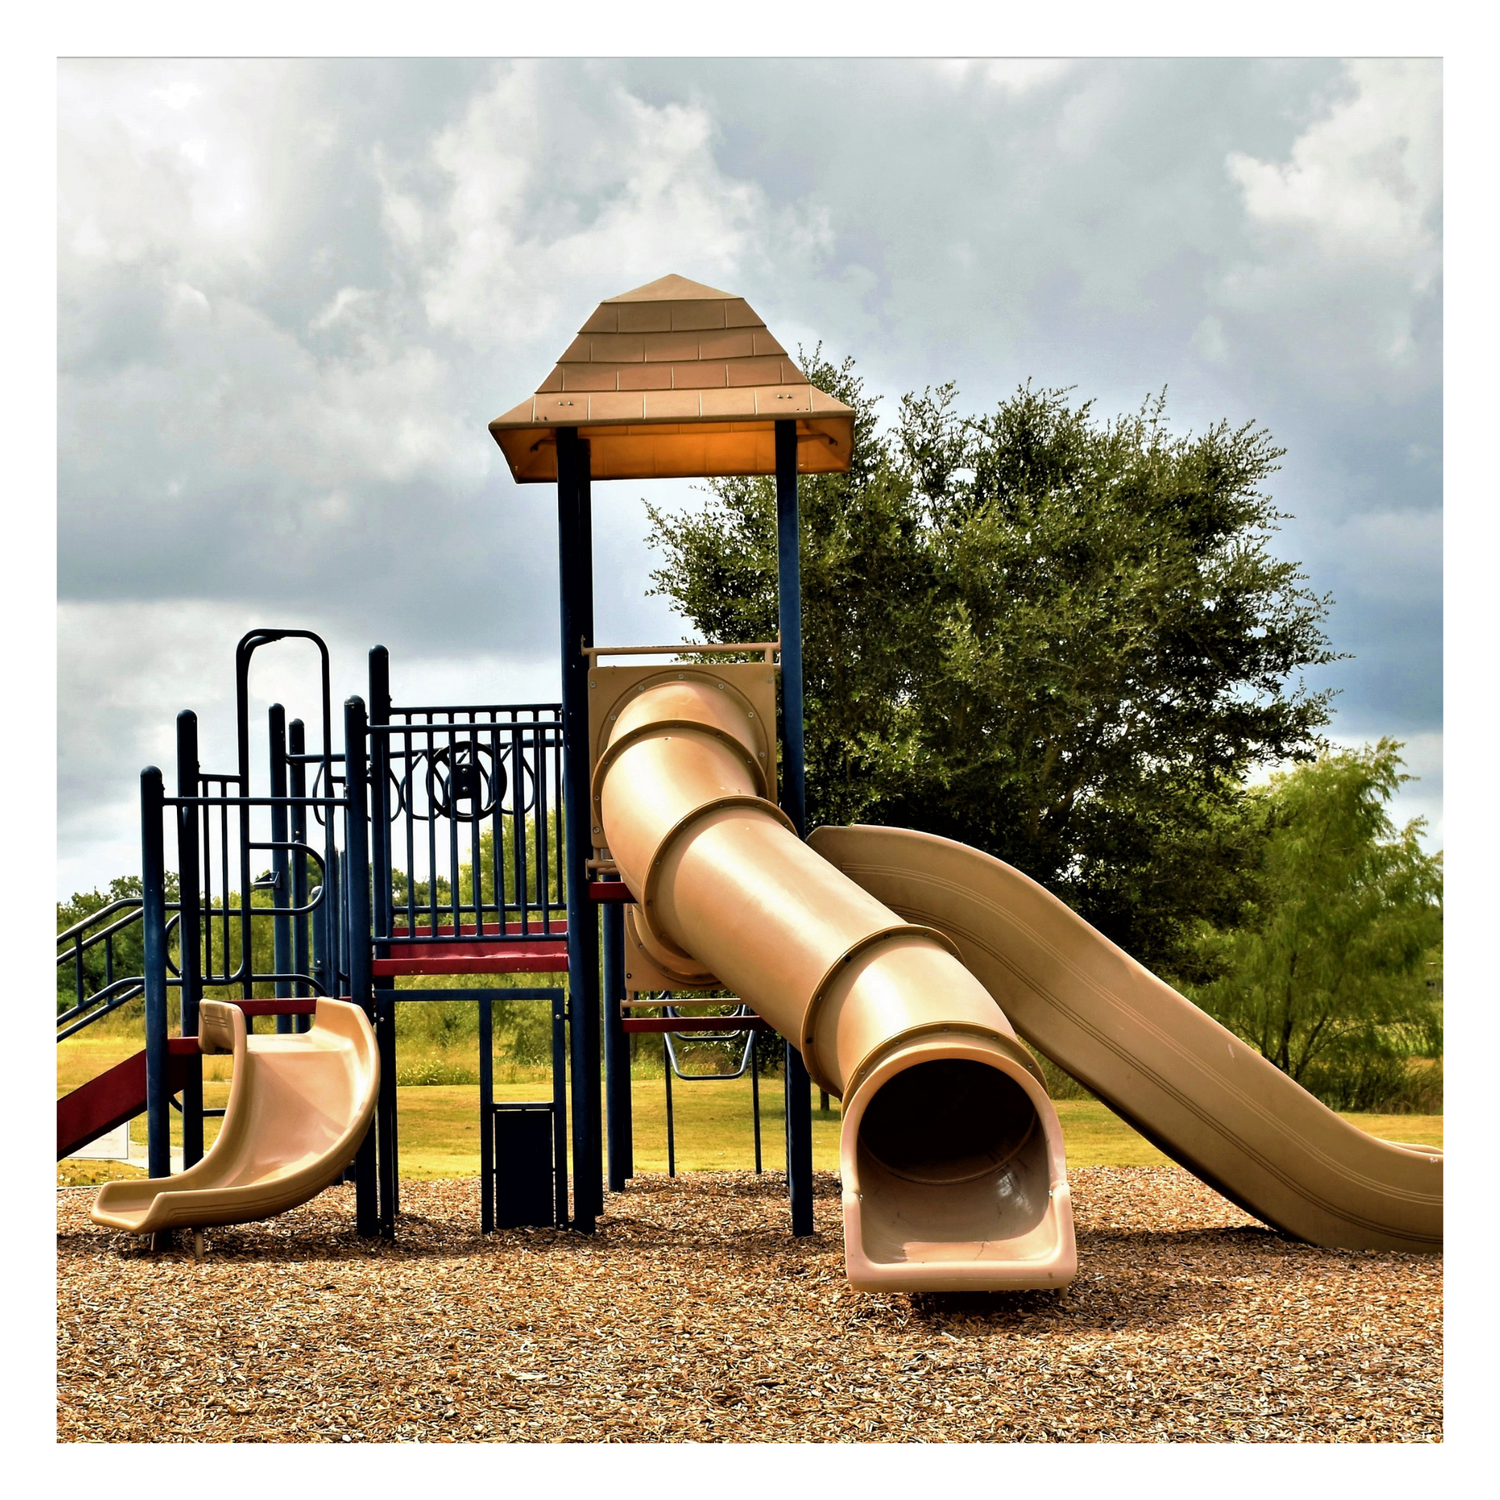 Children's playground with play bark chippings